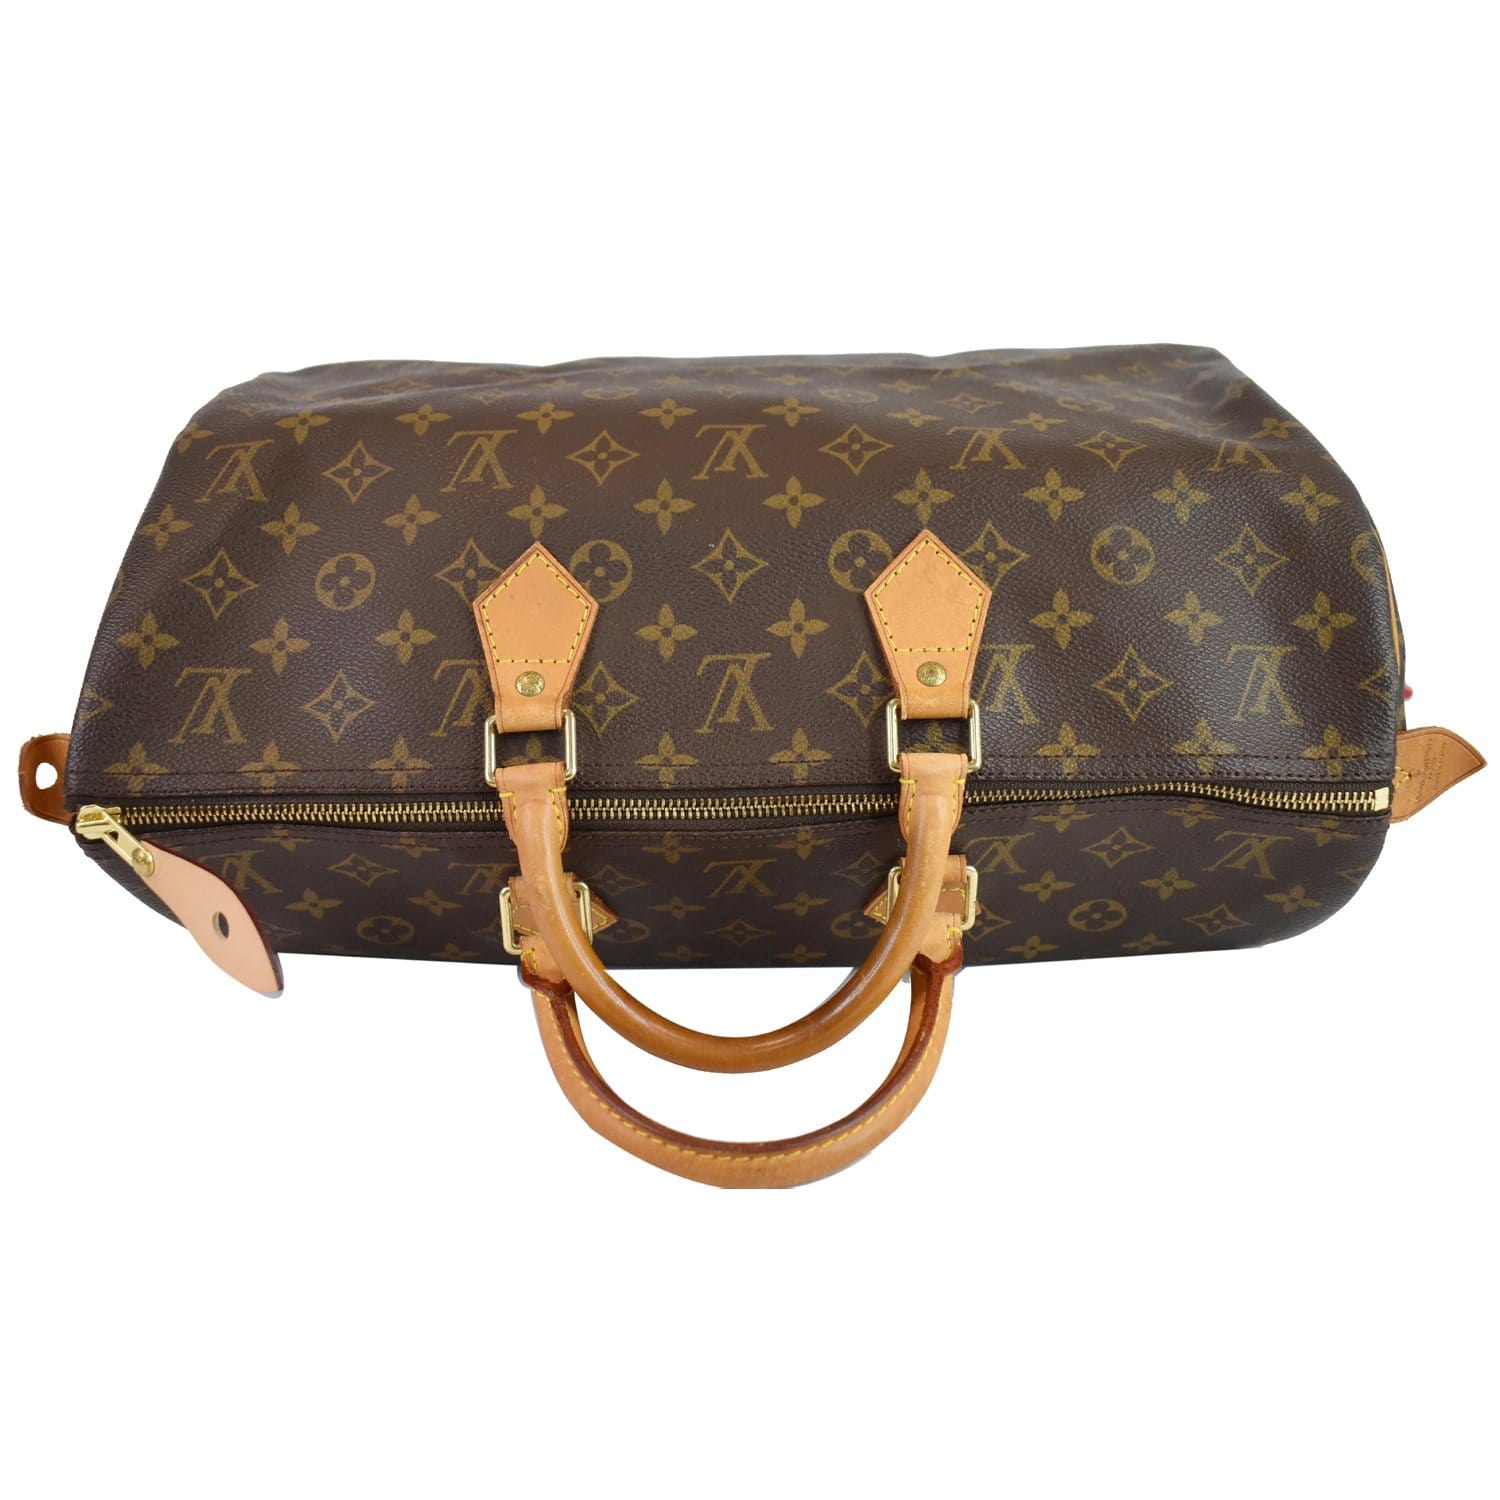 The Ultimate Bag Guide: The Louis Vuitton Speedy Bag - PurseBlog  Louis  vuitton speedy bag, Louis vuitton, Louis vuitton speedy 40